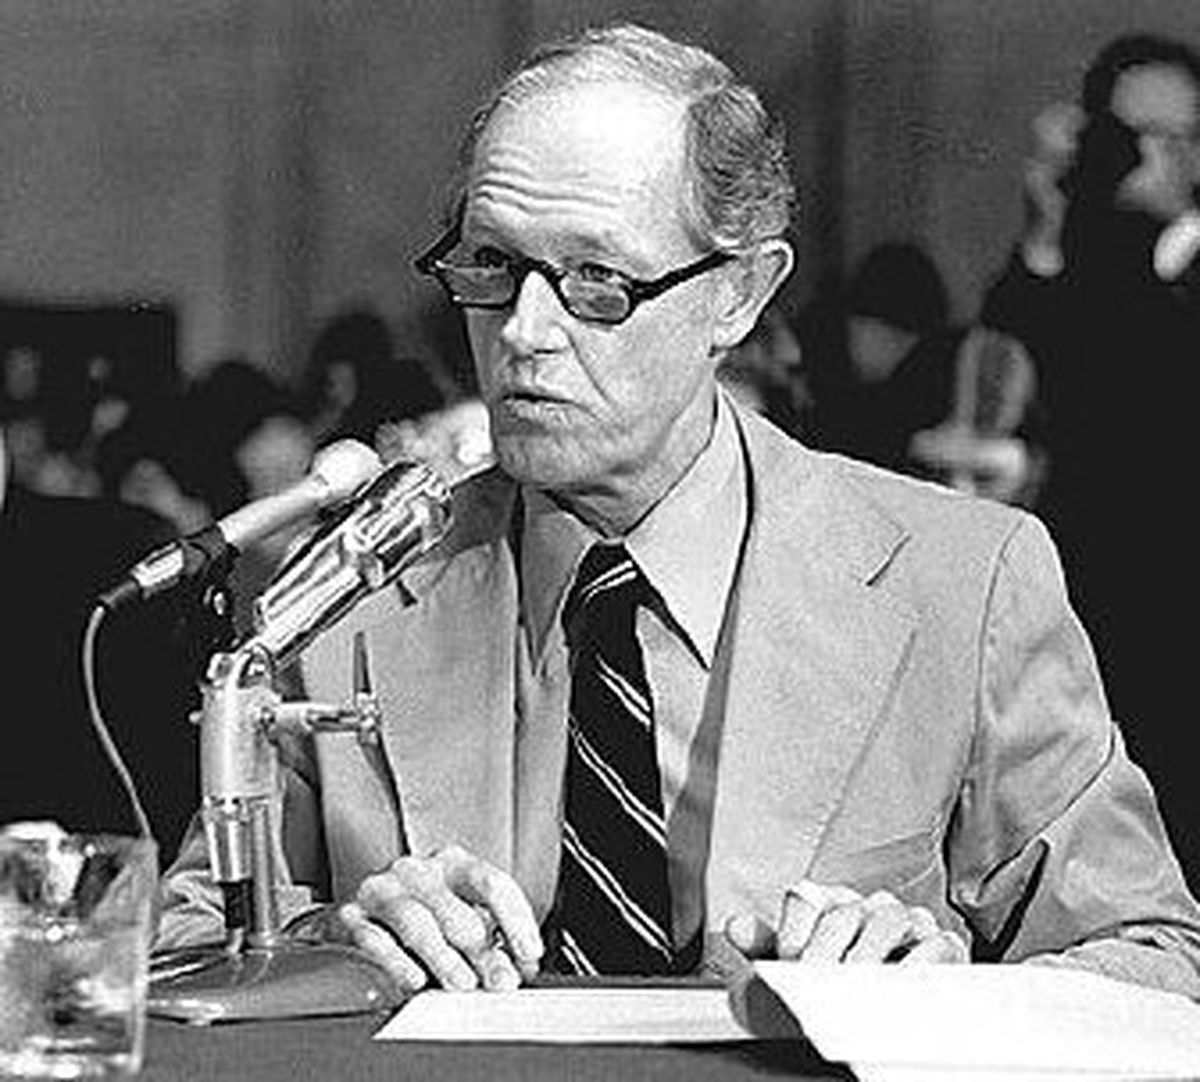 Watergate leader E. Howard Hunt dies at age of 88 | The Spokesman-Review